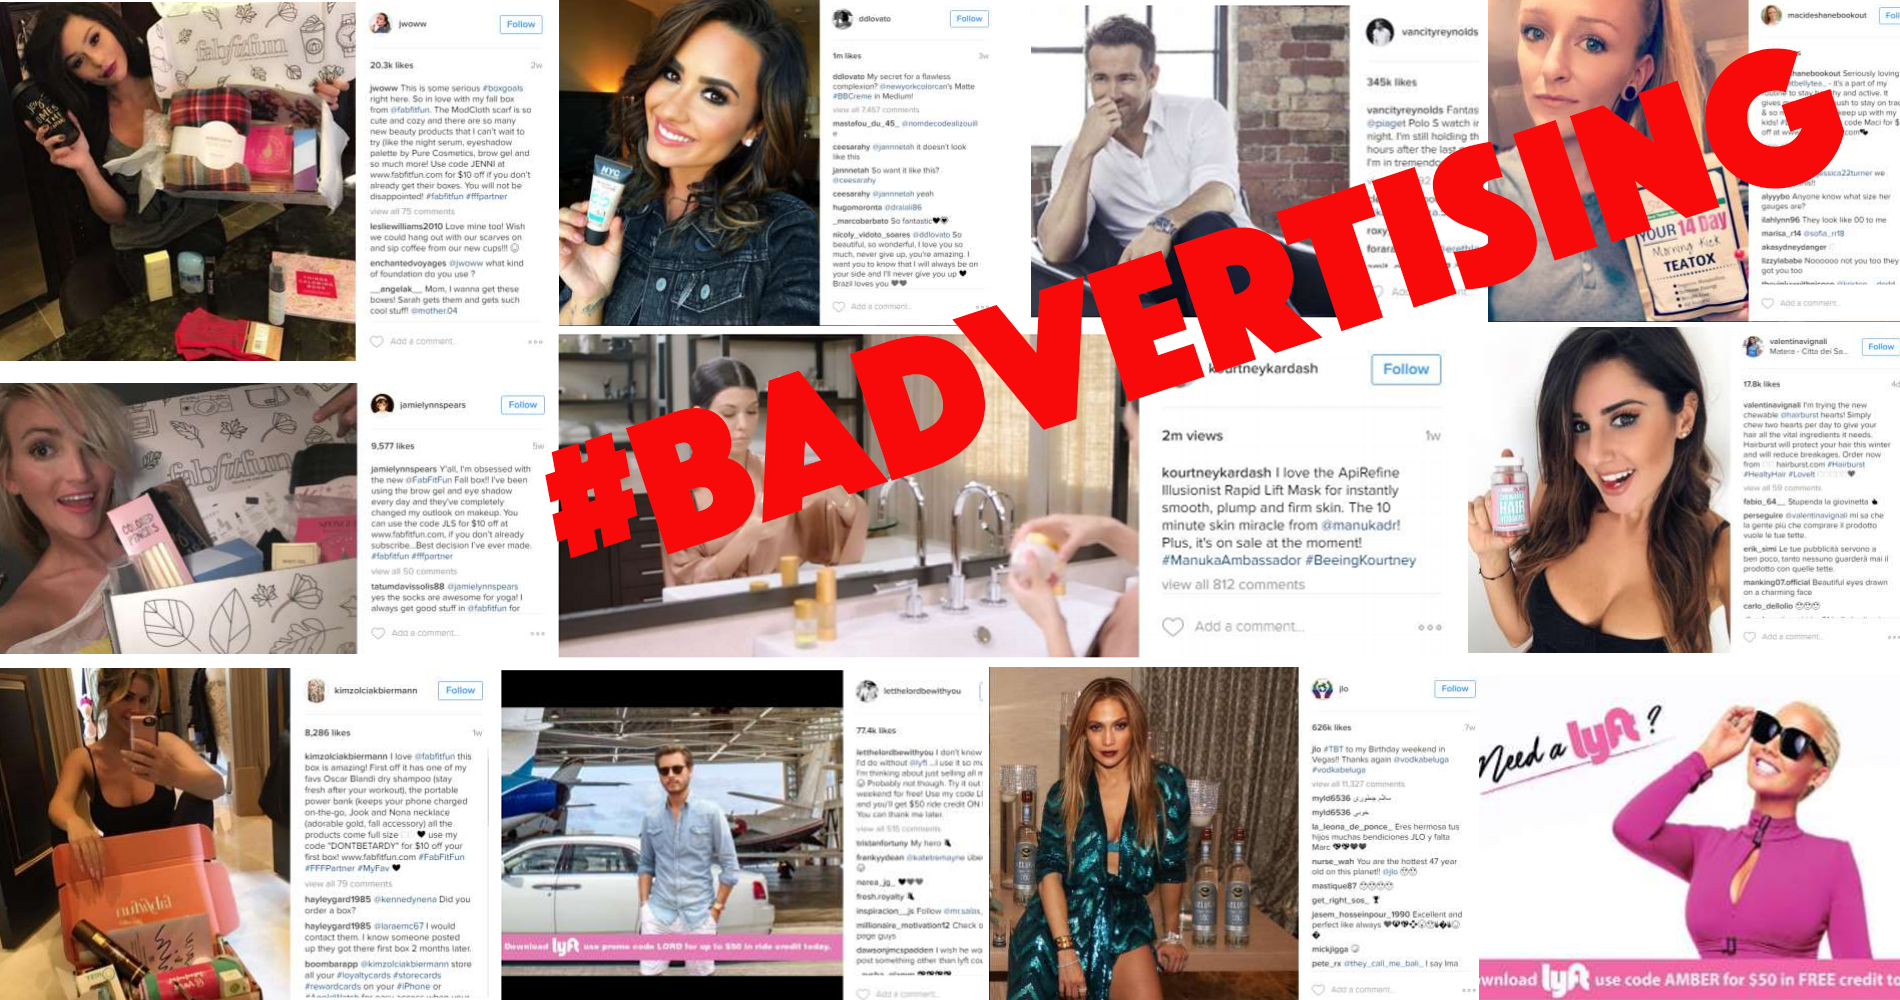 Feds Warn Social Media ‘Influencers’ To Stop It Already With The Stealth Ads